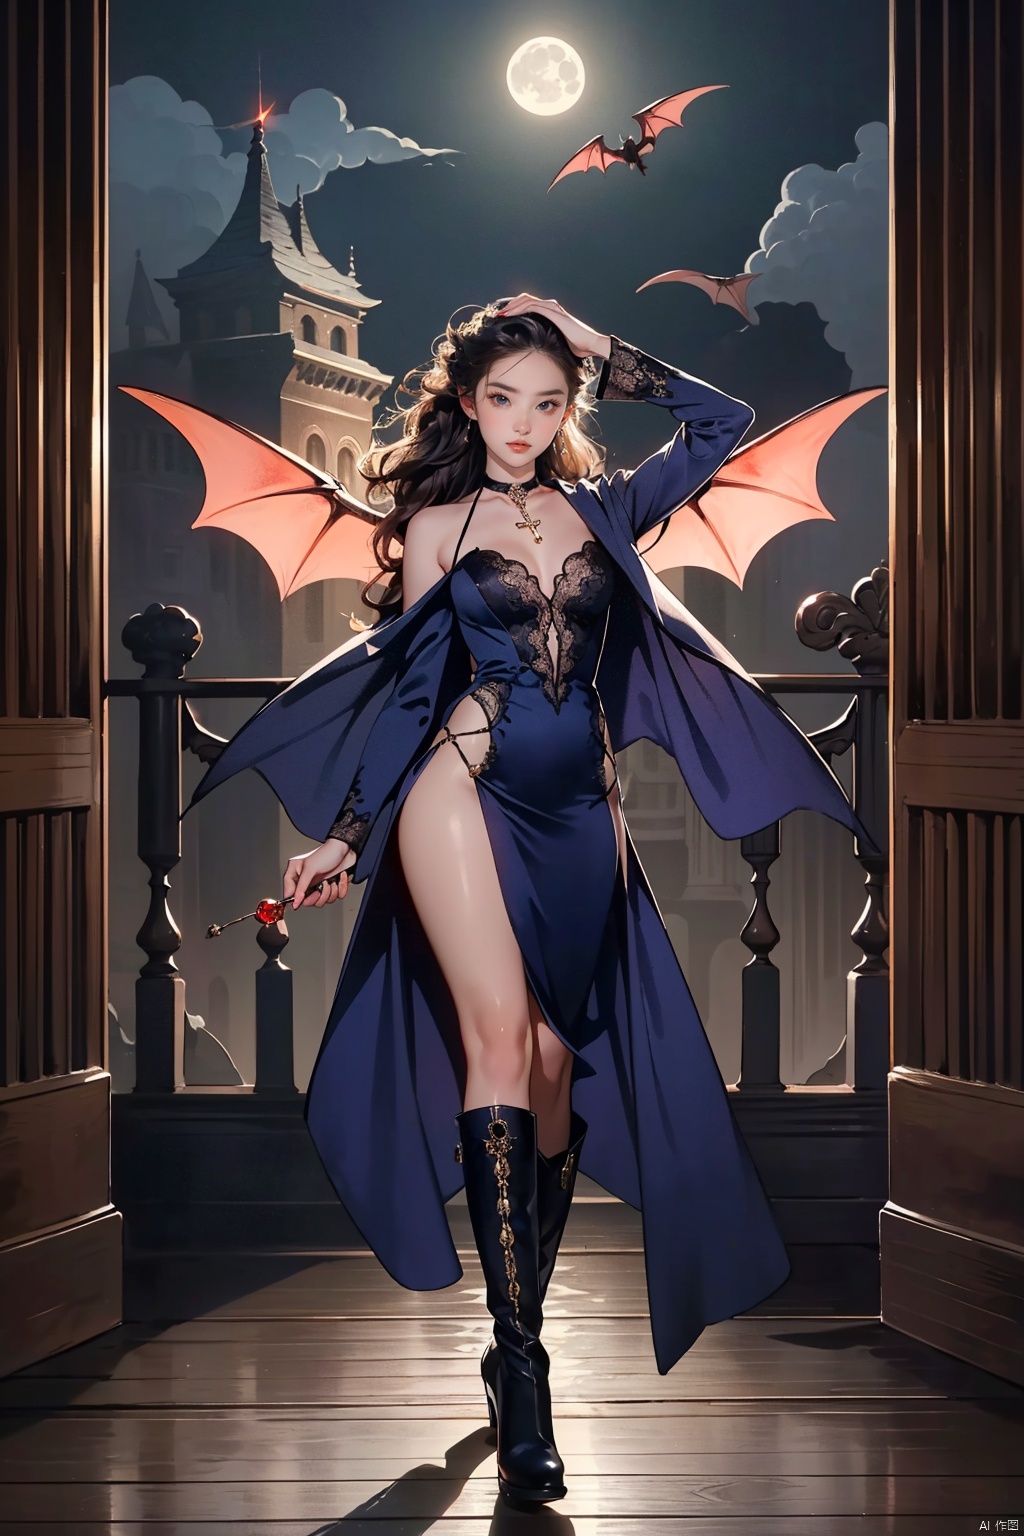 1girl, (sexy vampire lady with an alluring and mysterious air), ((full body)), (set against a gothic castle interior or moonlit cemetery scene), (pale, porcelain skin illuminated by the soft glow of candlelight or under the ethereal moonshine), (wearing a tight-fitting, Victorian-inspired midnight blue or blood-red gown that accentuates her hourglass figure, complete with a dramatic bustle and high collar), (gown adorned with intricate lace, dark embroidery, and possibly featuring a modest yet provocative décolletage), (shoulder-length raven hair cascading in loose waves, framing a face with sharp cheekbones and piercing [violet or emerald] eyes), (elongated fangs subtly revealed when she smiles or bites her lip seductively), (fashionable choker necklace, perhaps with a small red gemstone to symbolize her immortal status), (a sweeping, elegant cape made of luxurious fabric that drapes over her shoulders and trails behind her), (long, slender fingers tipped with crimson nail polish, elegantly posed or reaching out as if to beckon), (standing on delicate heeled shoes or knee-high boots in black leather, adorned with buckles or laces), (possessing an aura of power and grace, holding a glass of red wine or delicately clutching a jeweled cross pendant), (slight translucence to her form hinting at her supernatural nature), (a pair of bat-like wings folded behind her back, either real or as part of her attire's design), (an air of melancholy and passion intertwined, expressing both her eternal youth and sorrowful existence), (a subtle trail of mist or bats fluttering around her to enhance the eerie atmosphere)., ((poakl)), , (wide shot:0.95), (Dynamic pose:1.4),